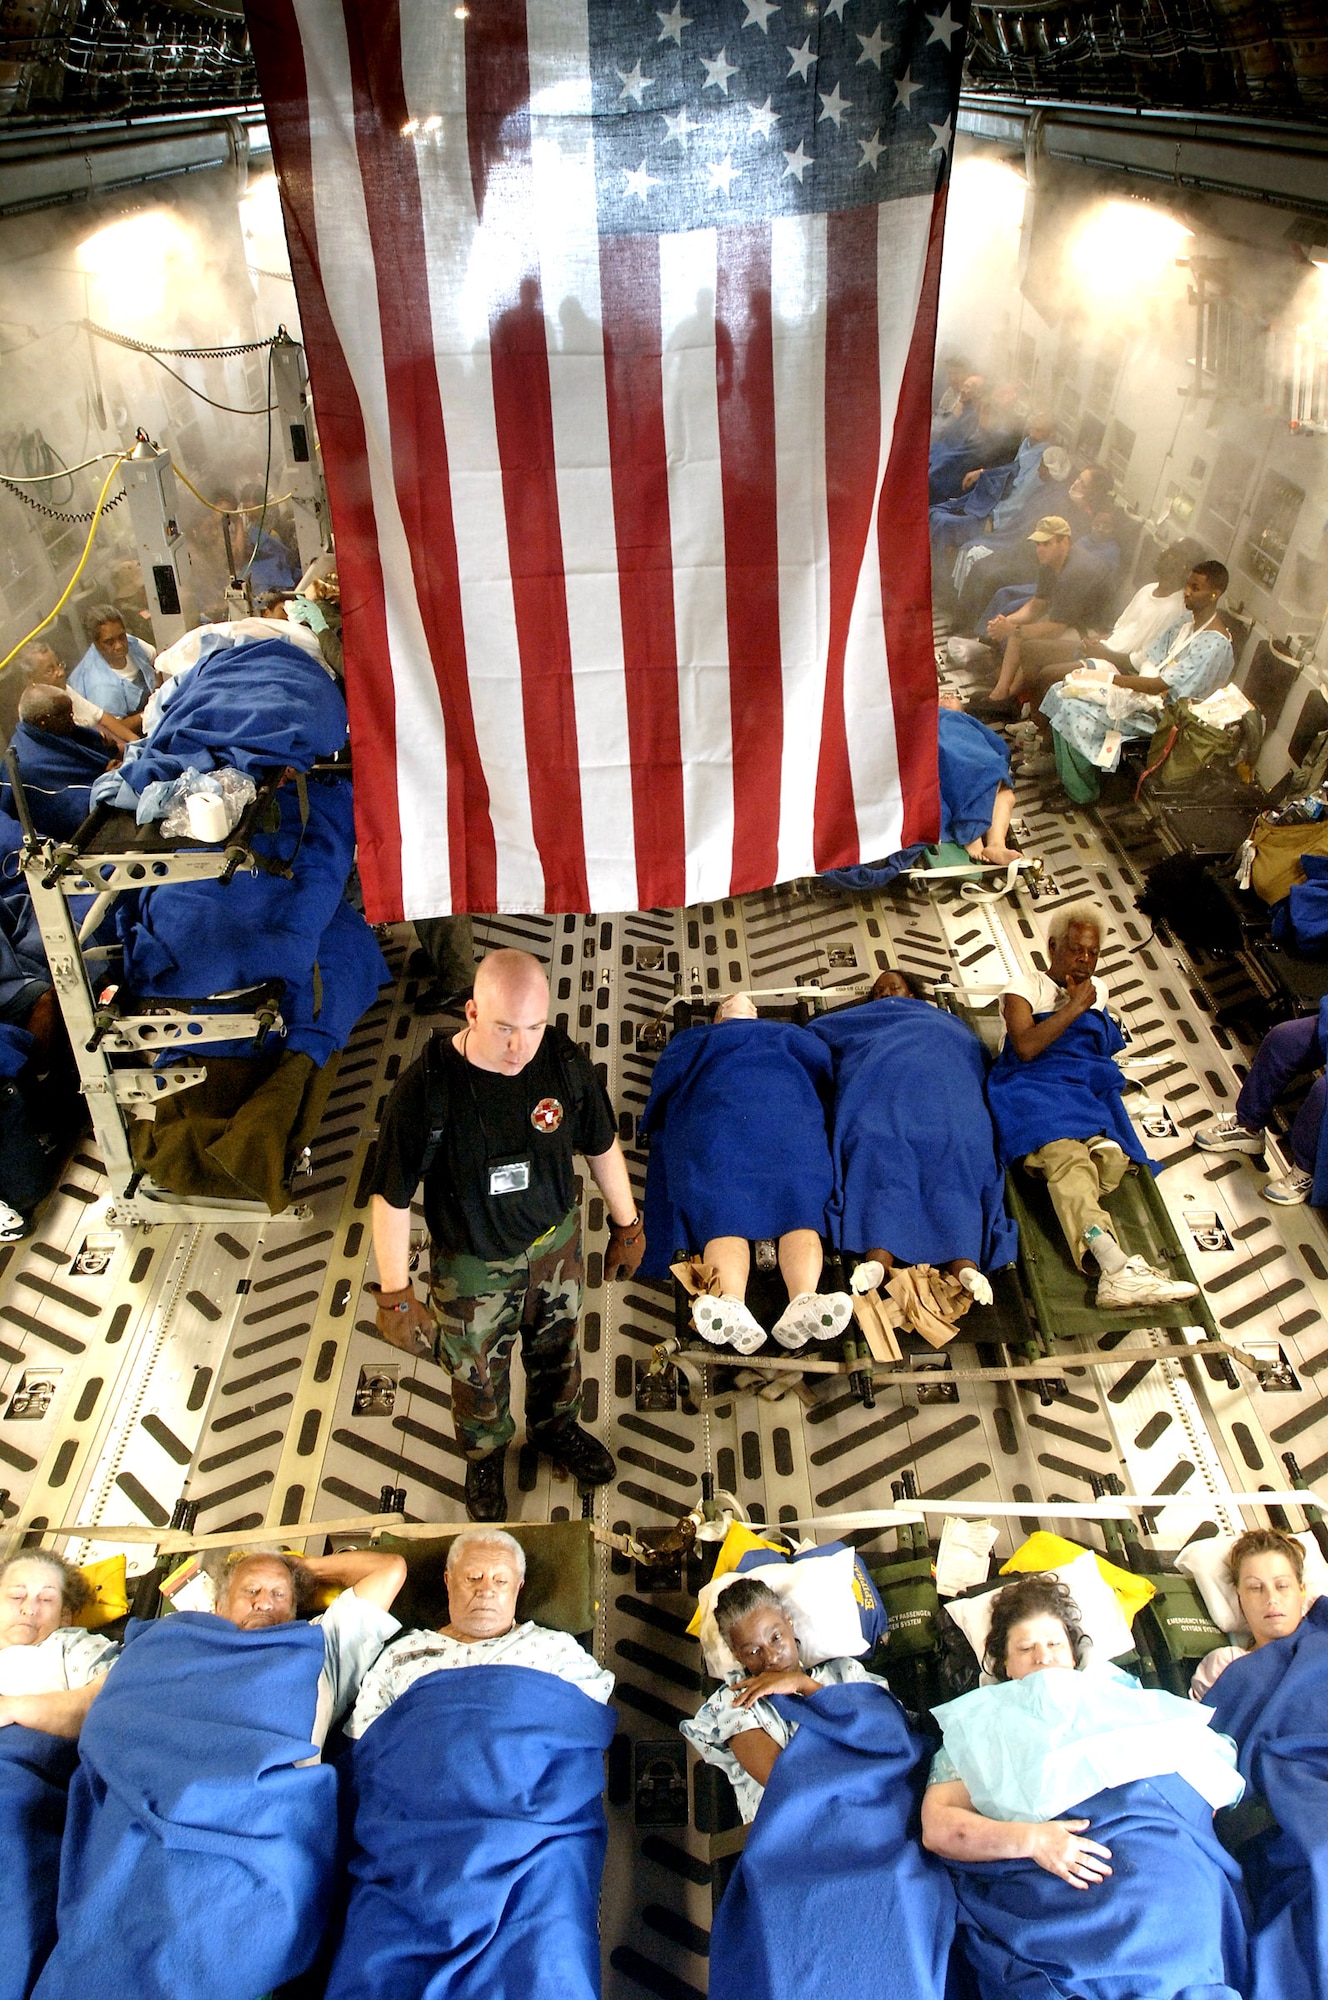 Sick and injured people are prepared and comforted for a flight aboard a C-17 Globemaster III of the 62nd and 446th Airlift Wing, McChord Air Force Base. The aircraft and crew have stoped at the New Orleans International Airport on 1 Sept, 2005. These refugees from hospitals and various sources are evacuating the devastated areas left by Hurricane Katrina. Their destination will be an Air Force Base in a state in southern region not affected. Critical Care Aeromedical Teams cared for hundreds of patients on this day. (U.S. Air Force photo Master Sgt. Lance Cheung)